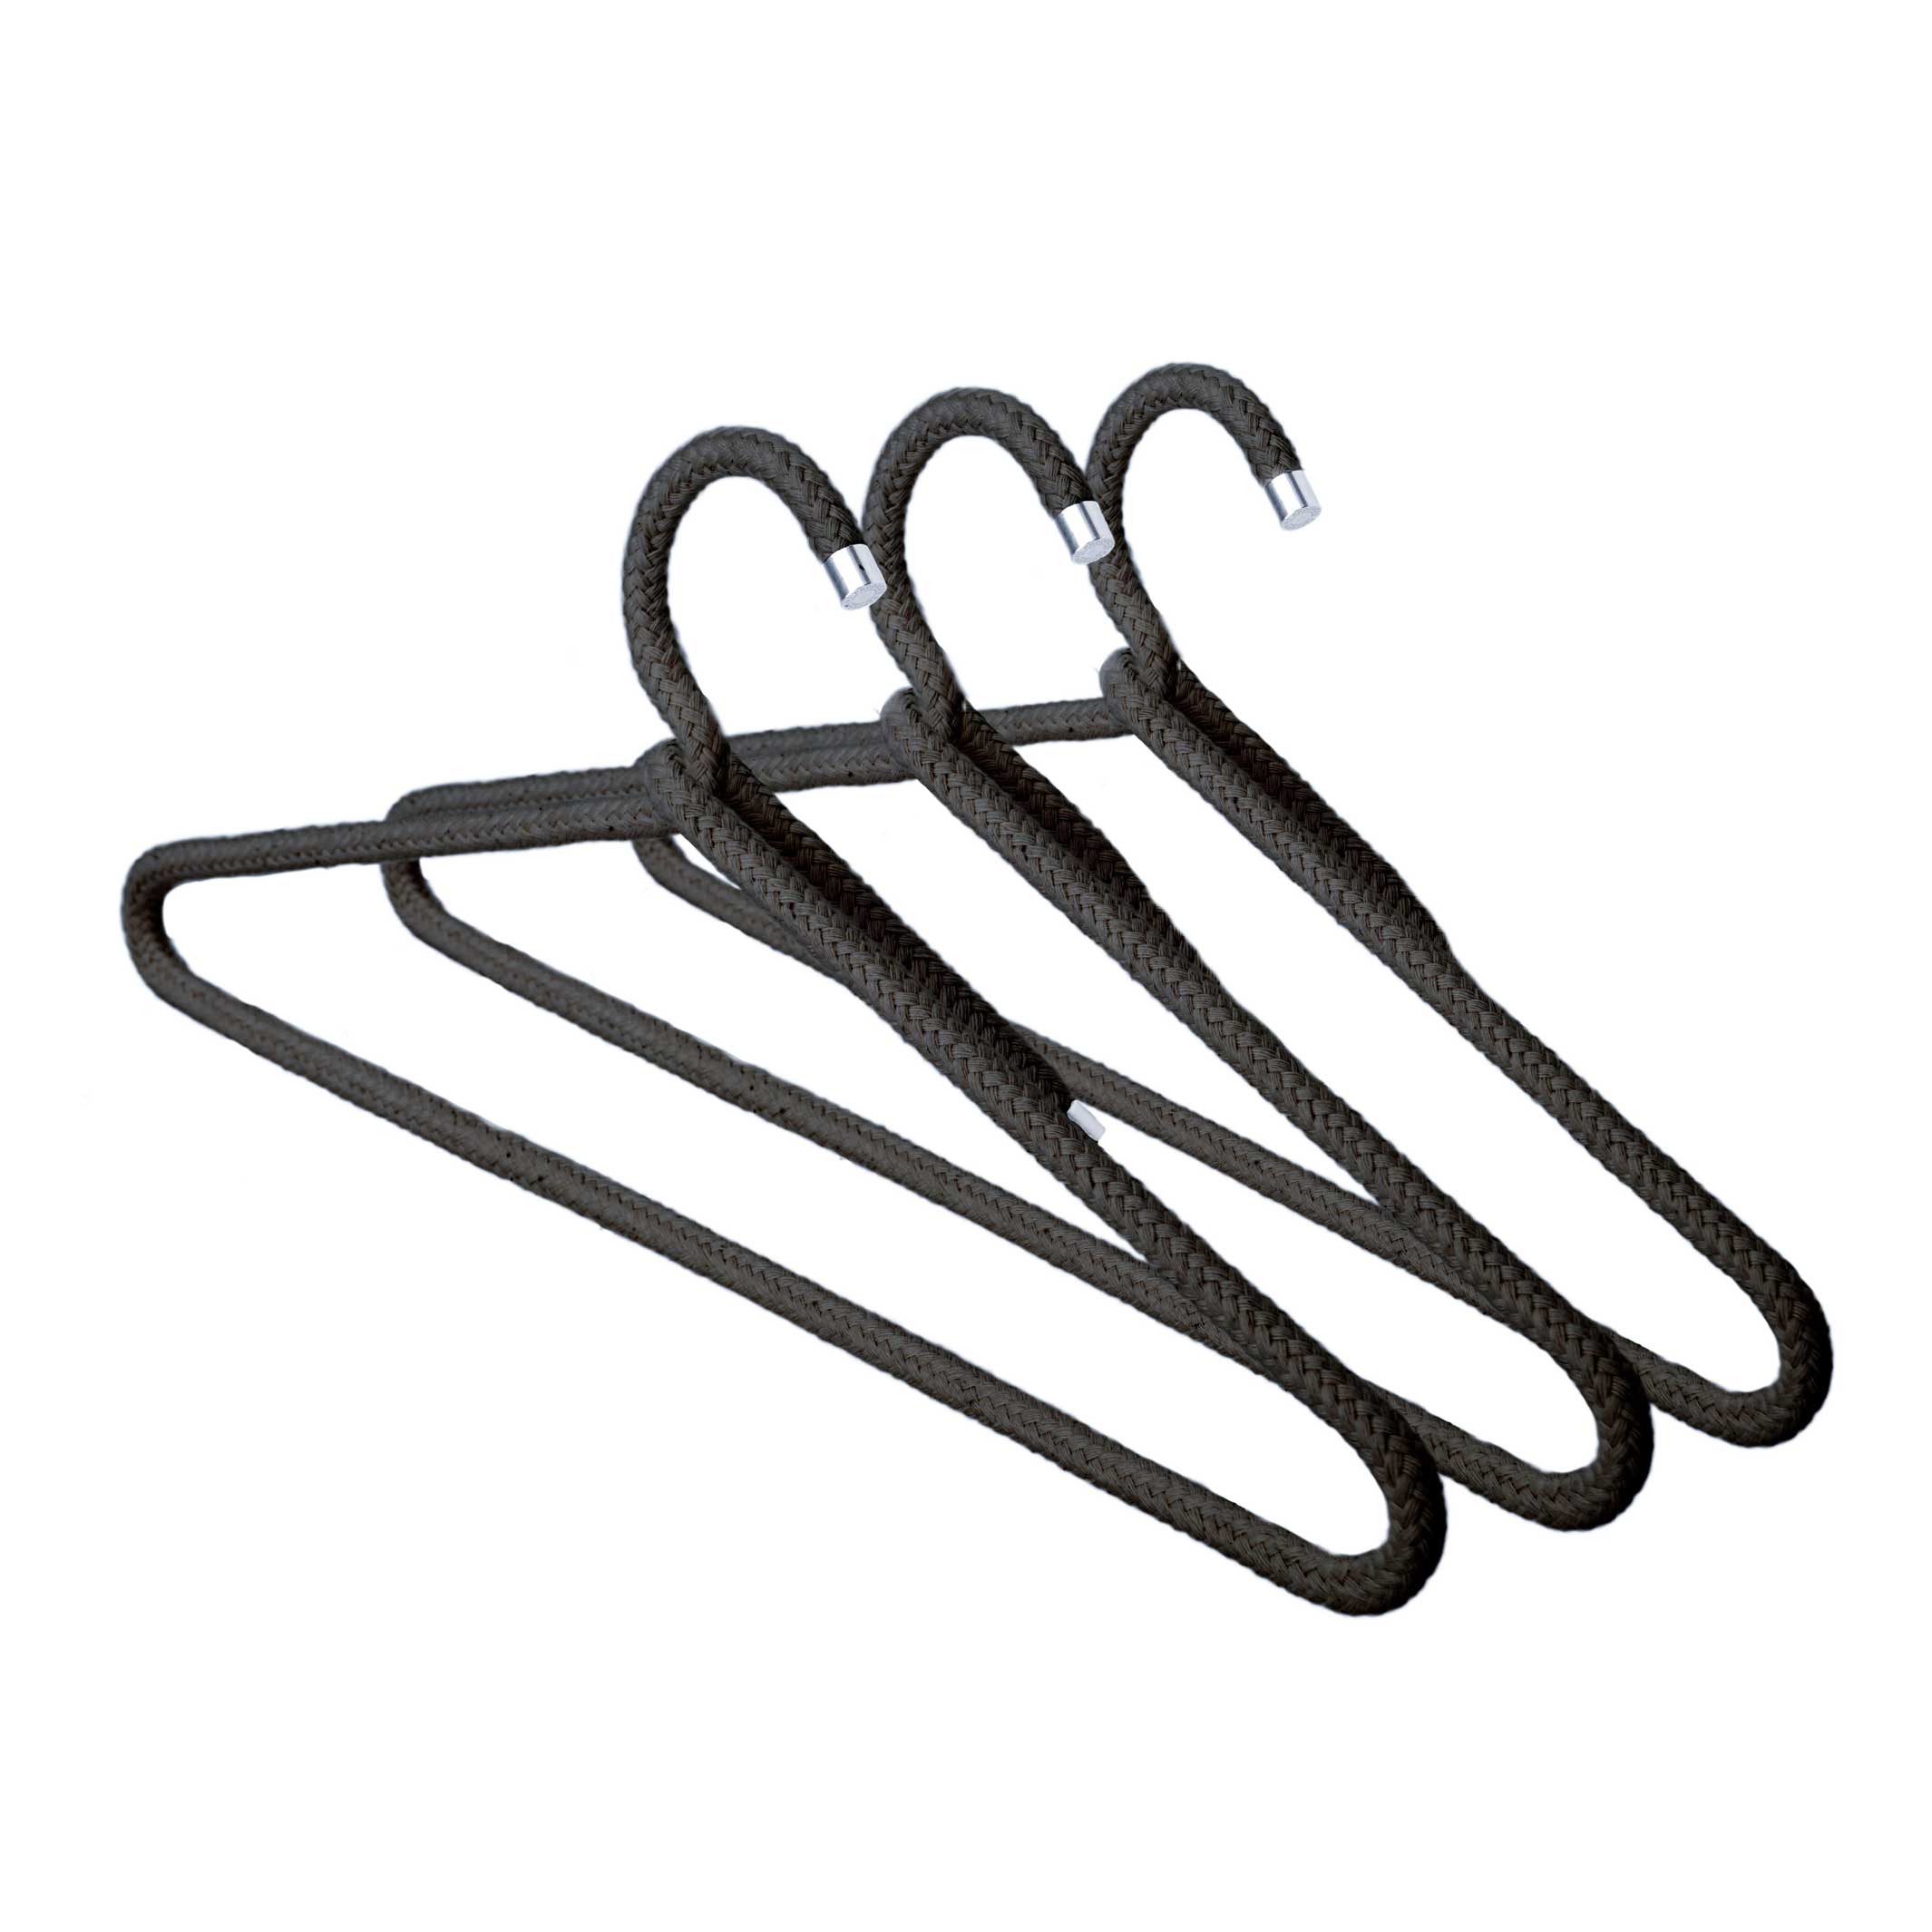 ROPE HANGER Cotton | Black Cotton HANGERS | Set of 3 | Peppermint Products